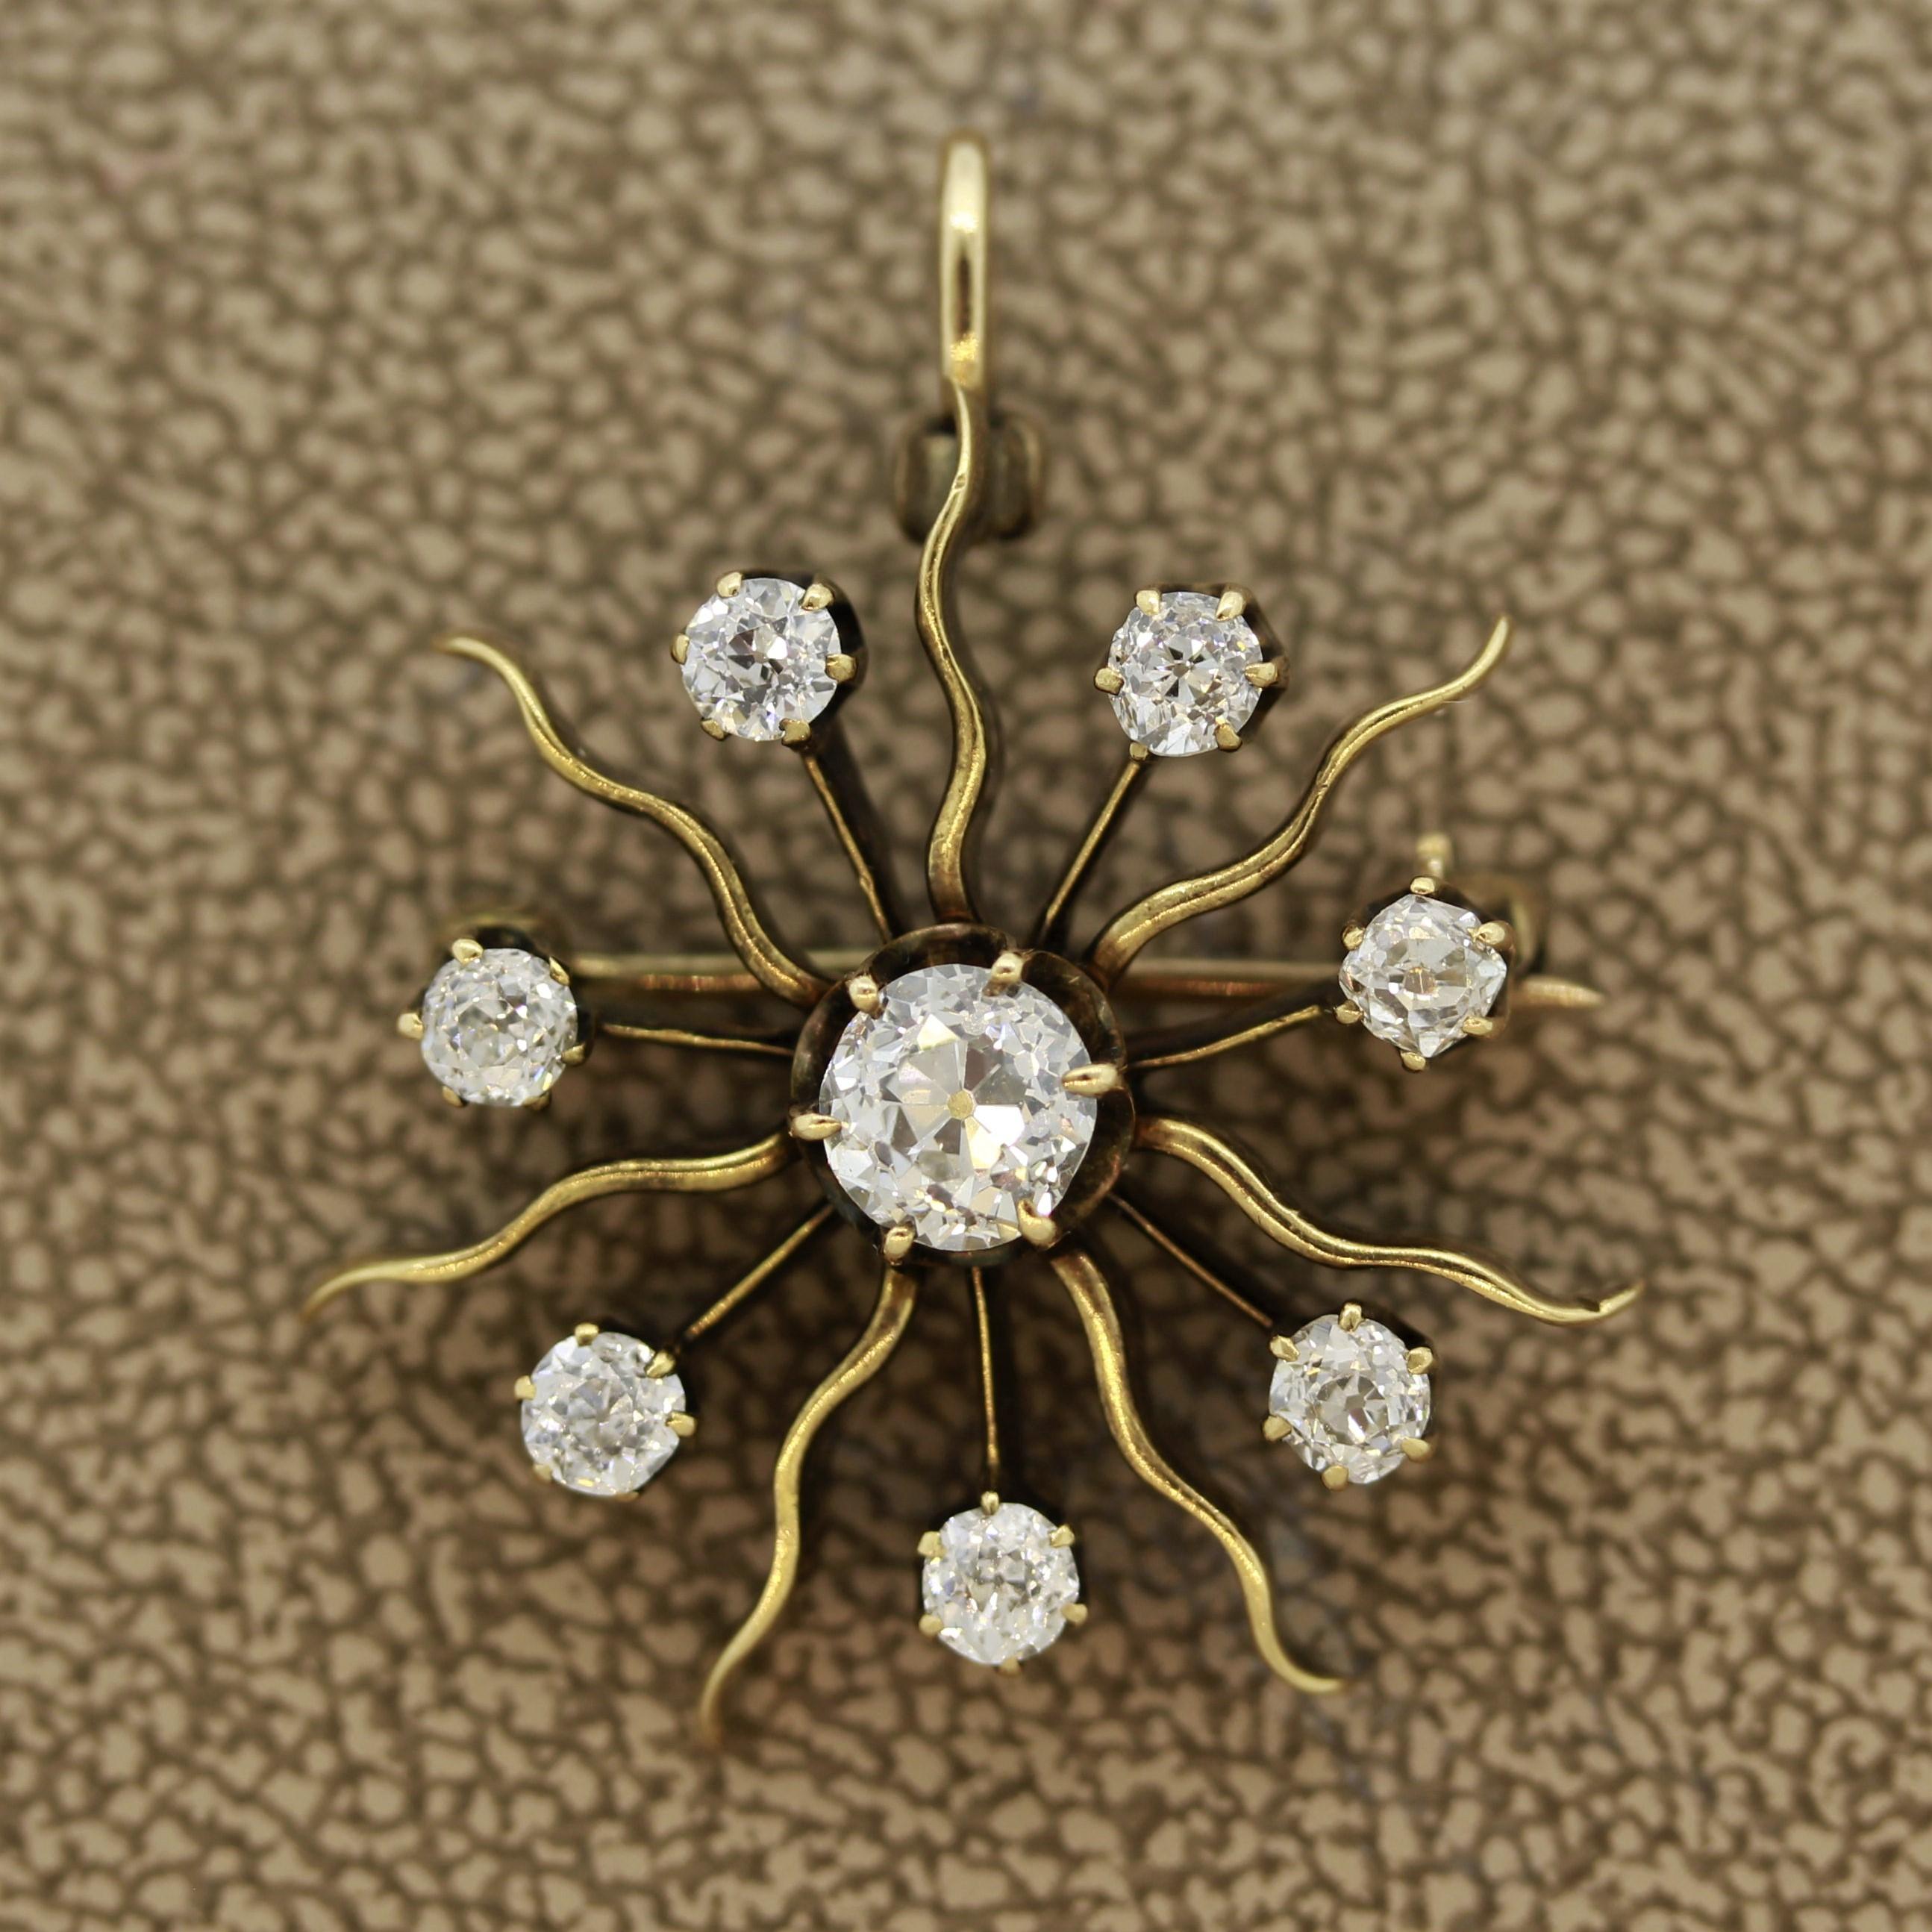 A well made piece from the 1880’s, this antique Victorian pin depicts a bursting sun. It features a large old cut diamonds in the center which is surrounded by 7 smaller diamonds. In total they weigh 1.03 carats and have excellent brilliance and